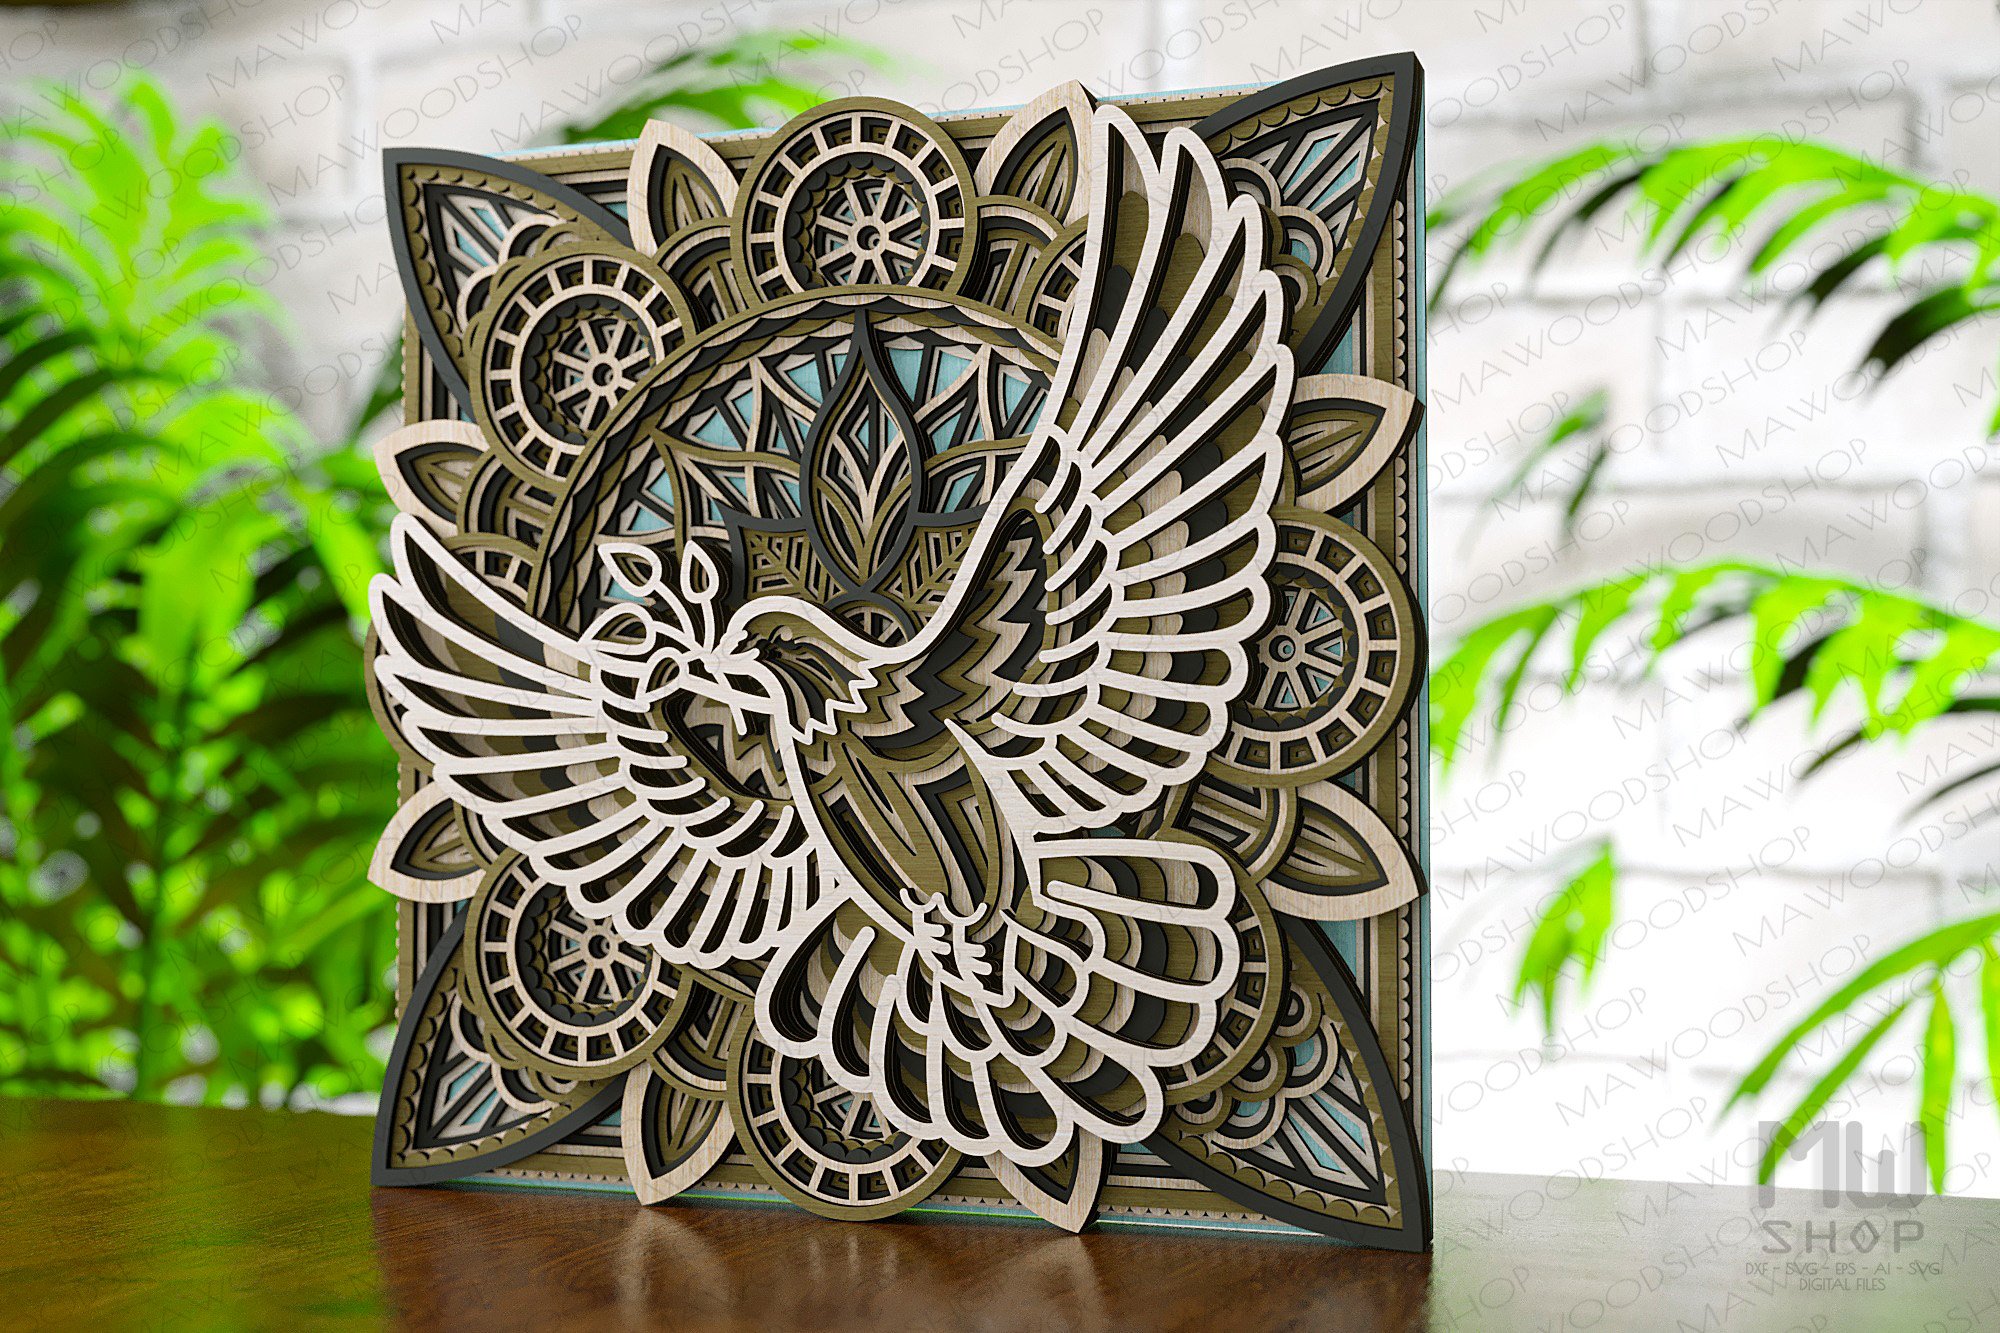 Card with an intricate design on it.